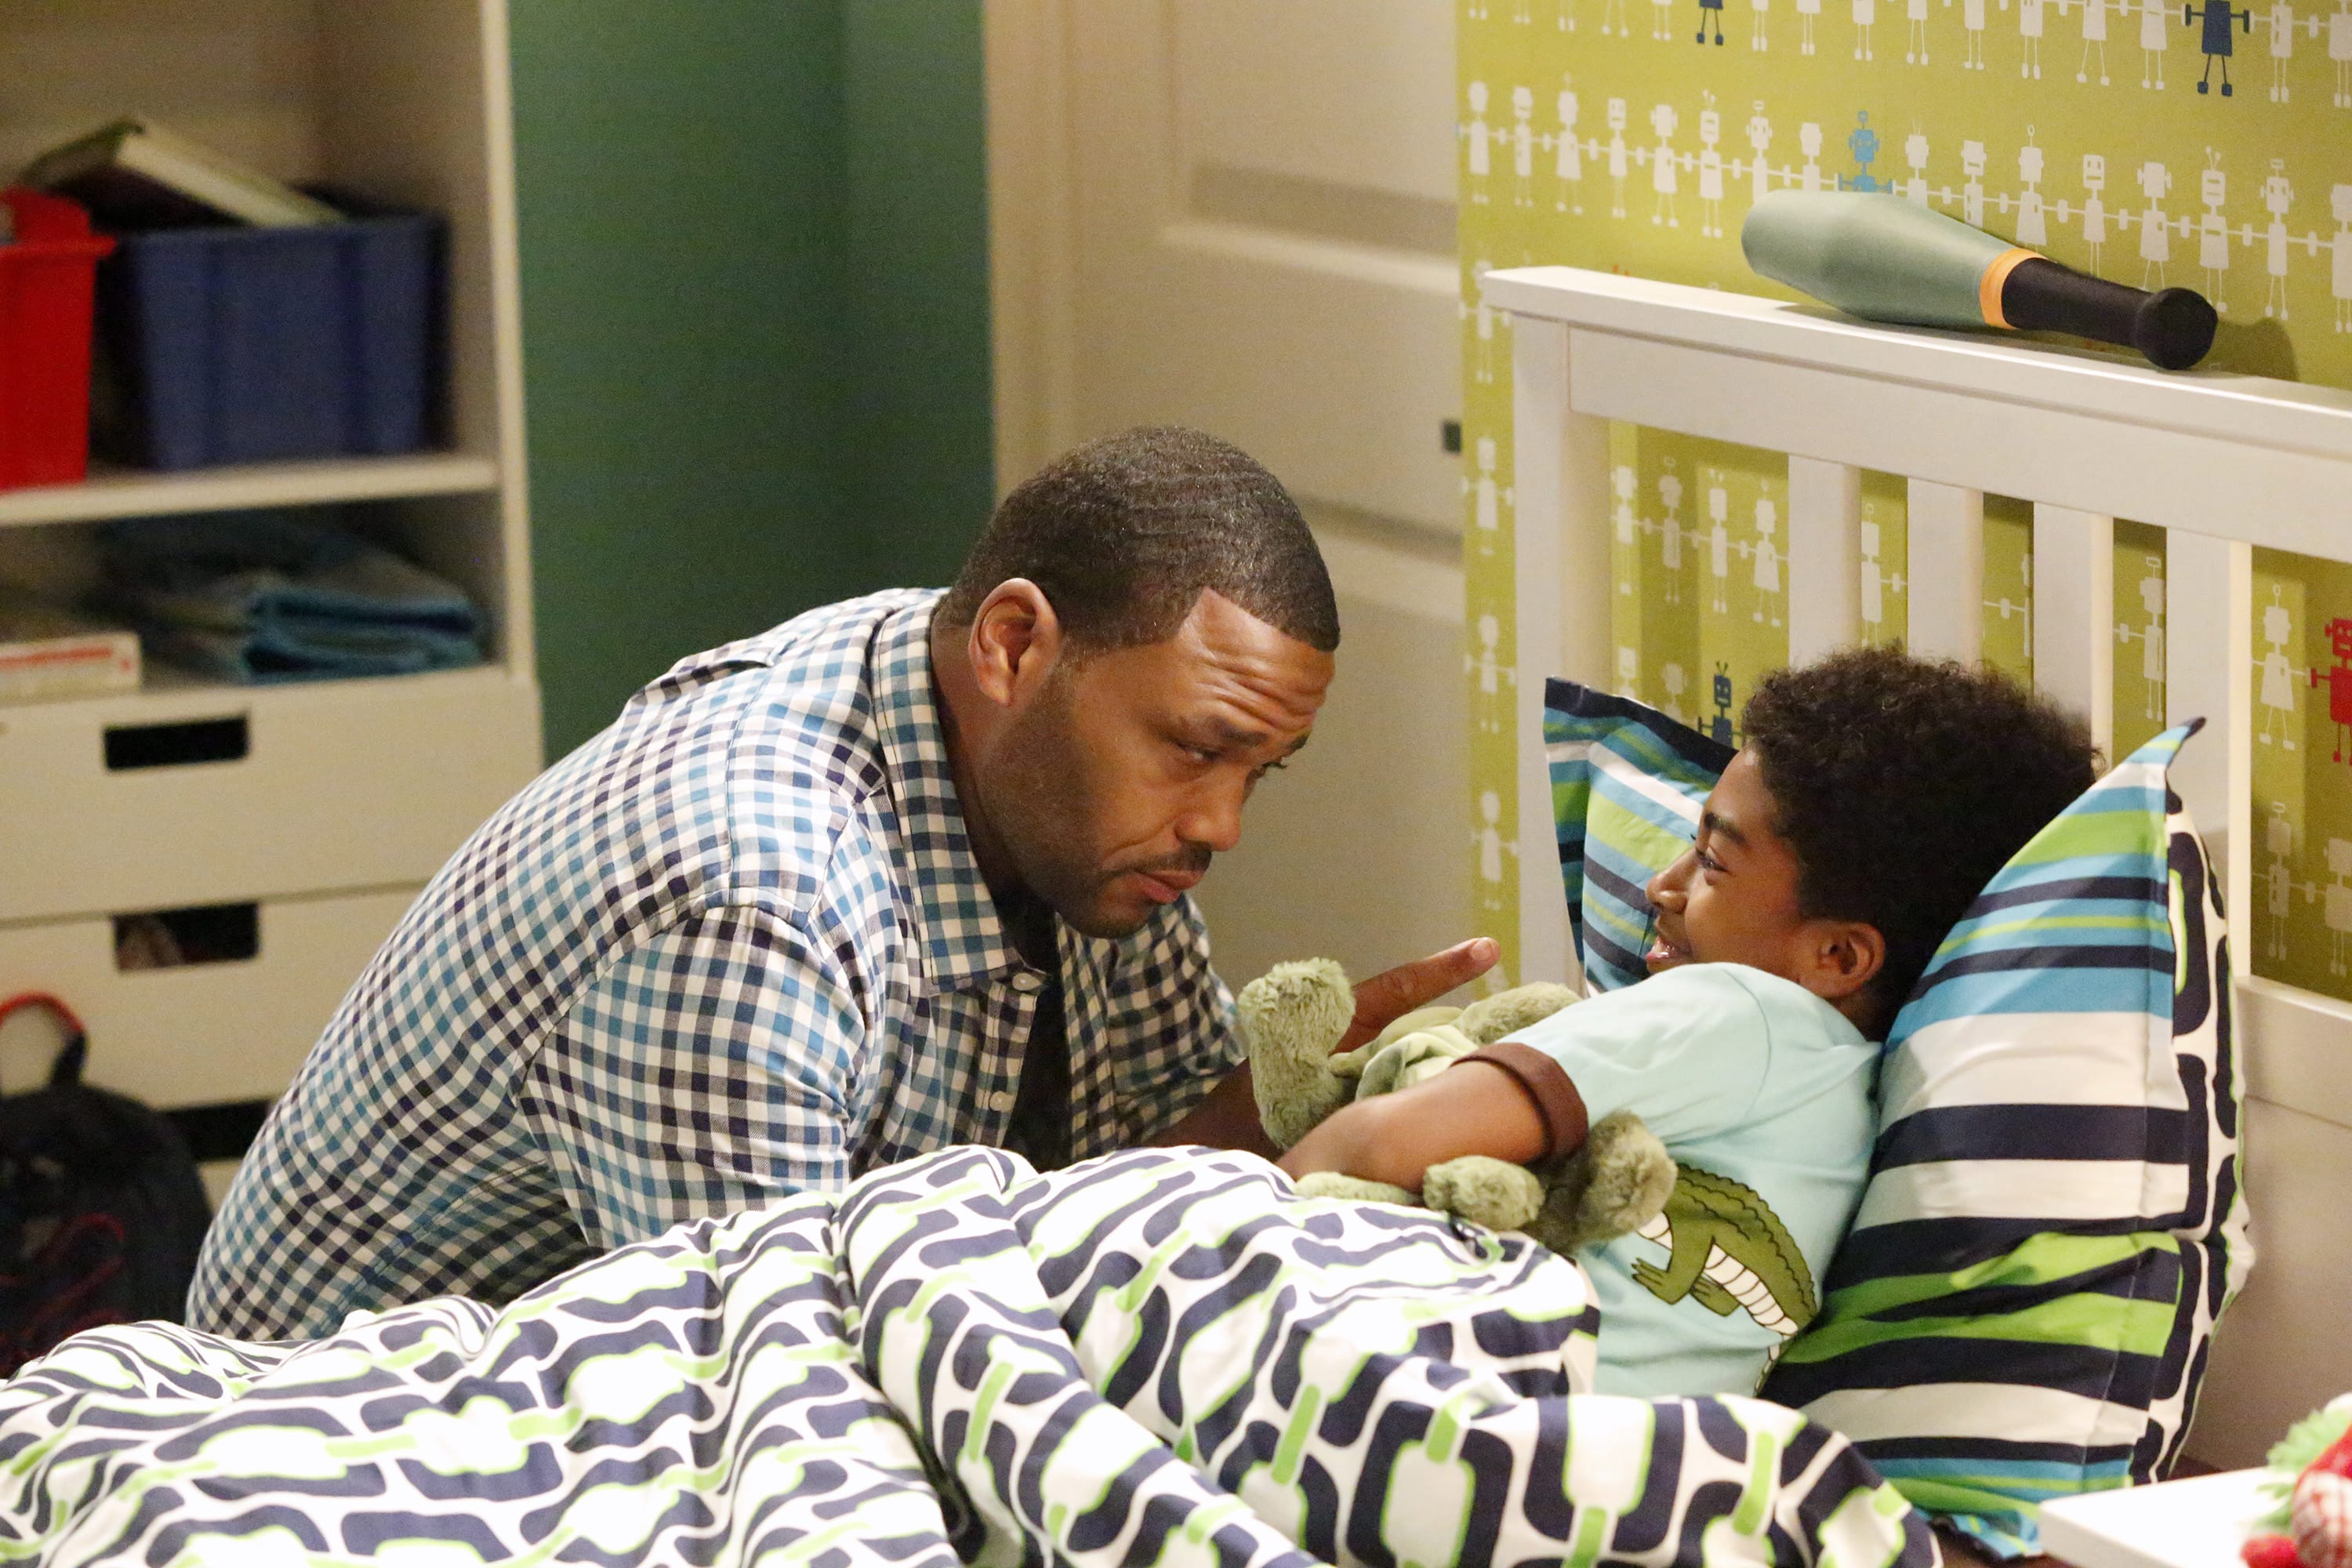 Anthony Anderson and Miles Brown in episode "THE Word" of "black-ish." The episode examines the evolution of THE word through the generations and just who, if anyone, has the right to use it.